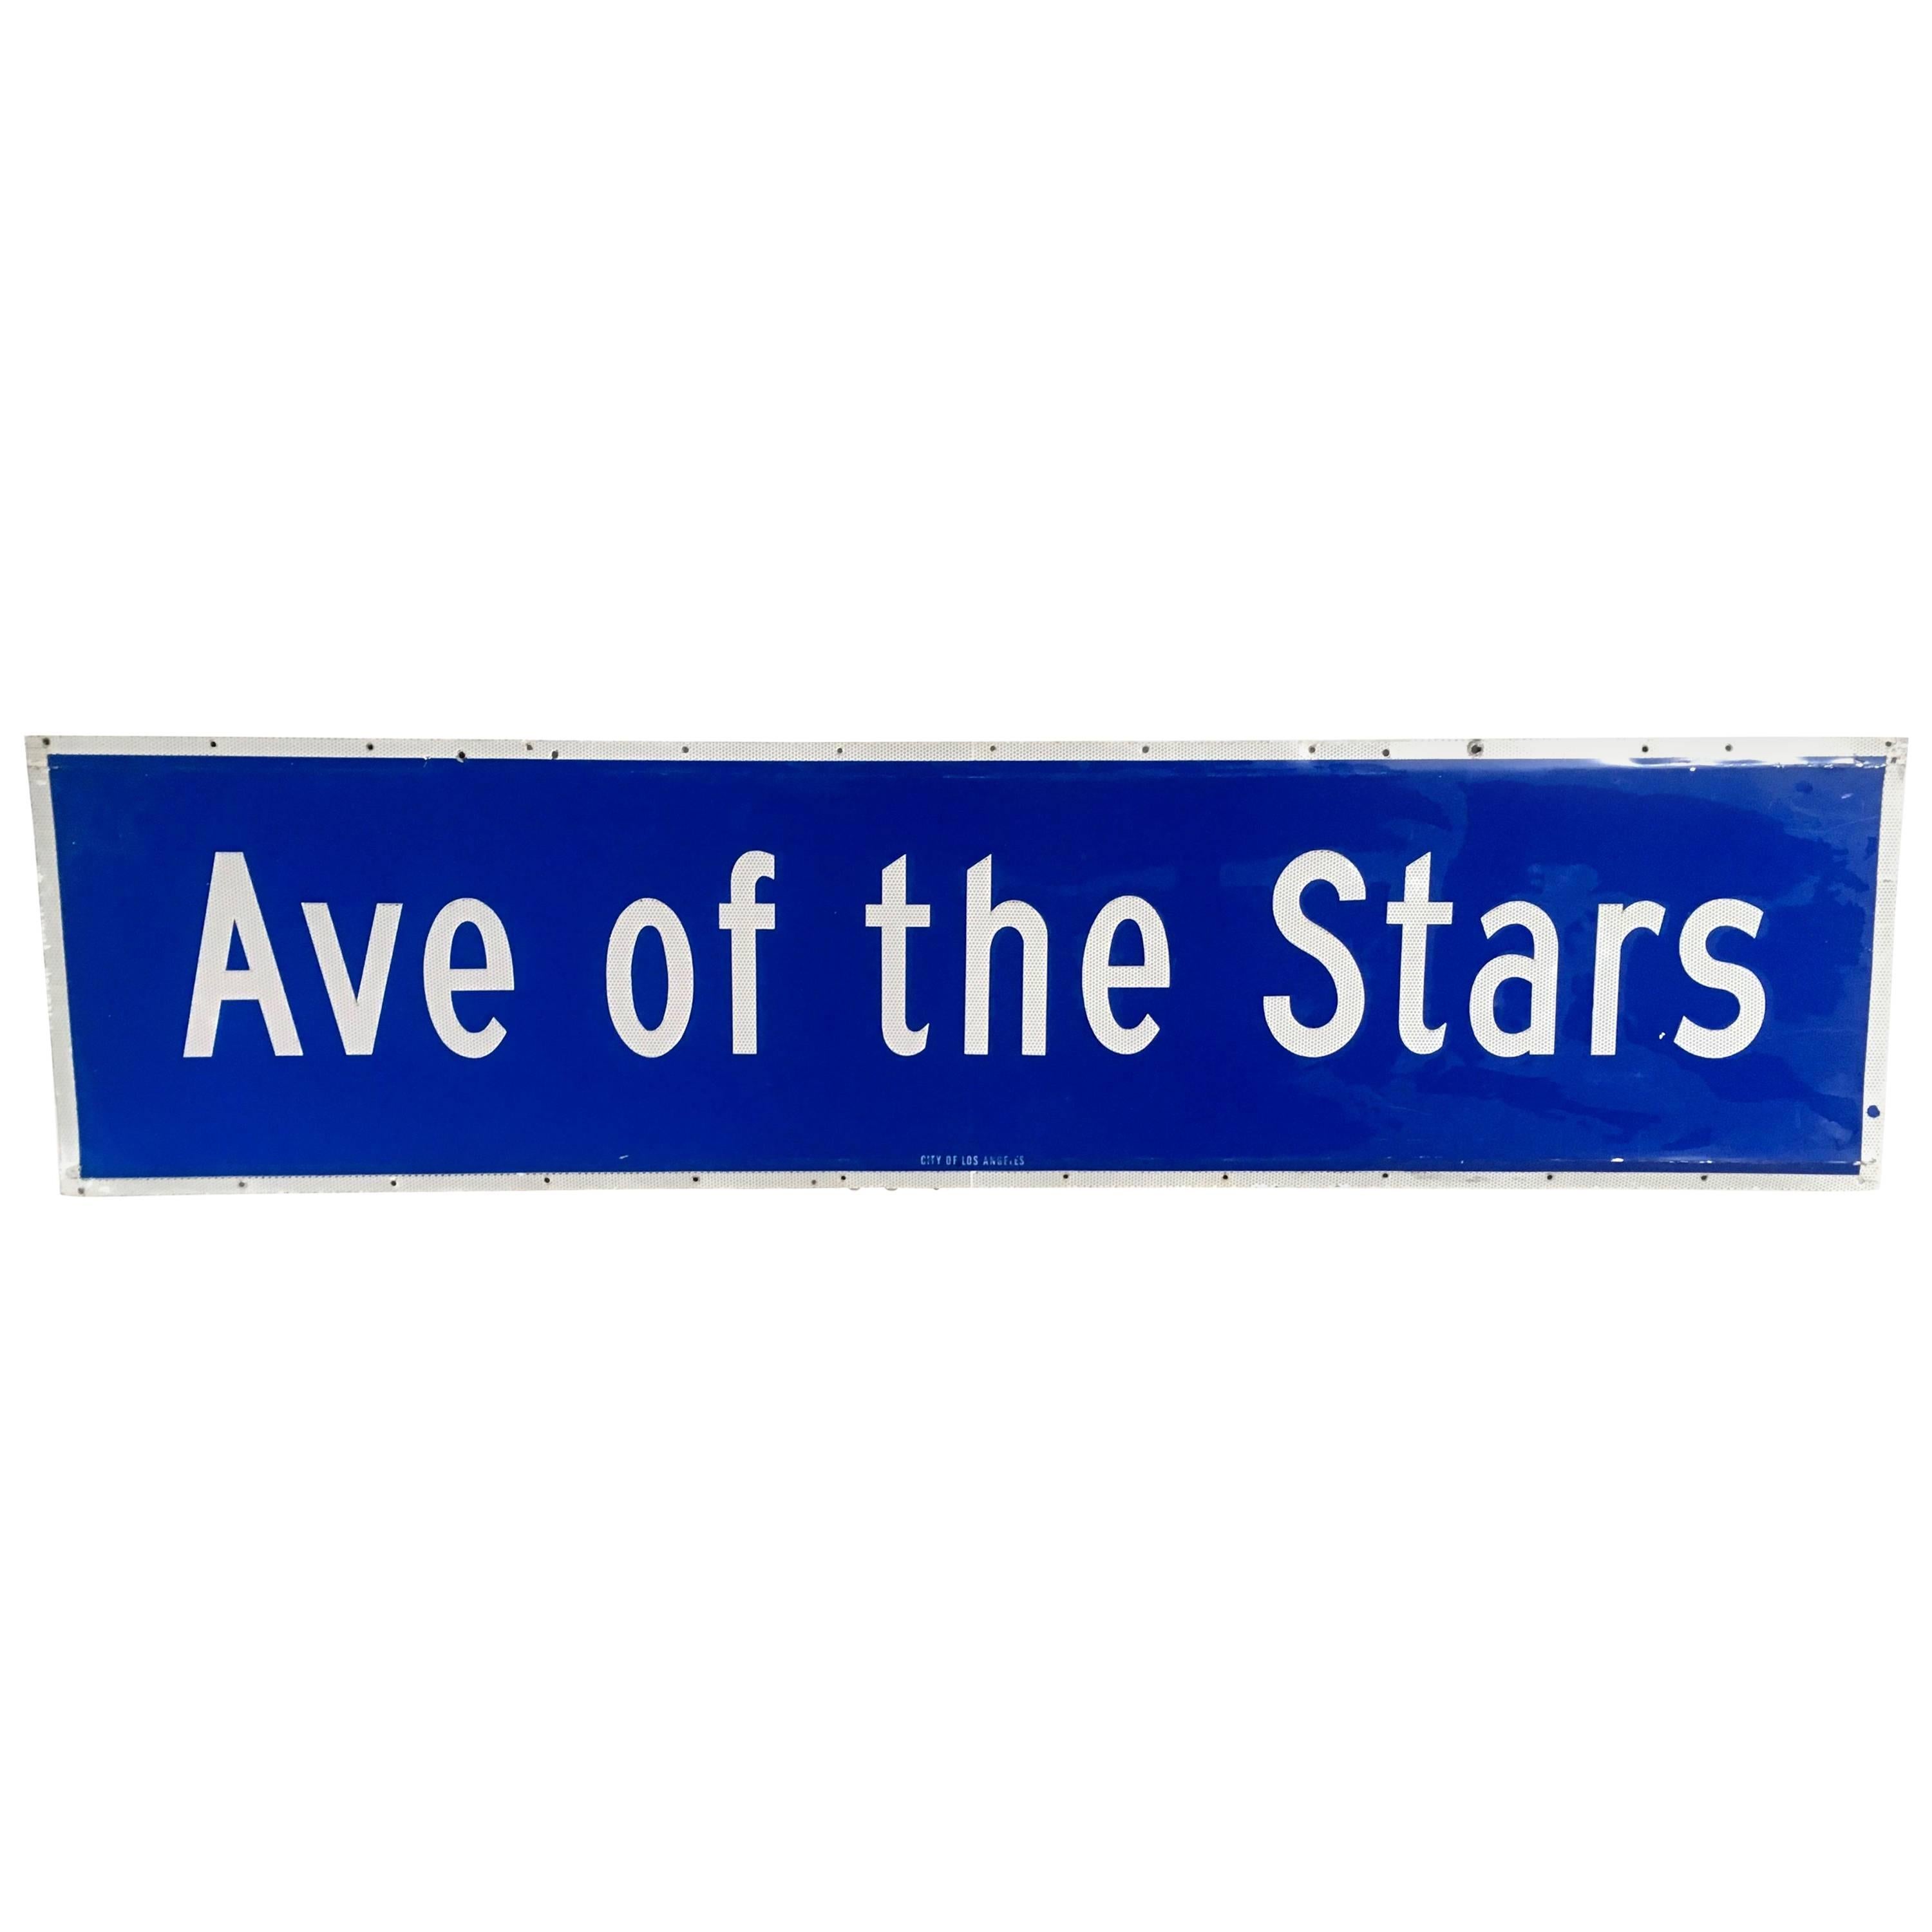 Vintage "Ave of the Stars" Los Angeles Street Sign